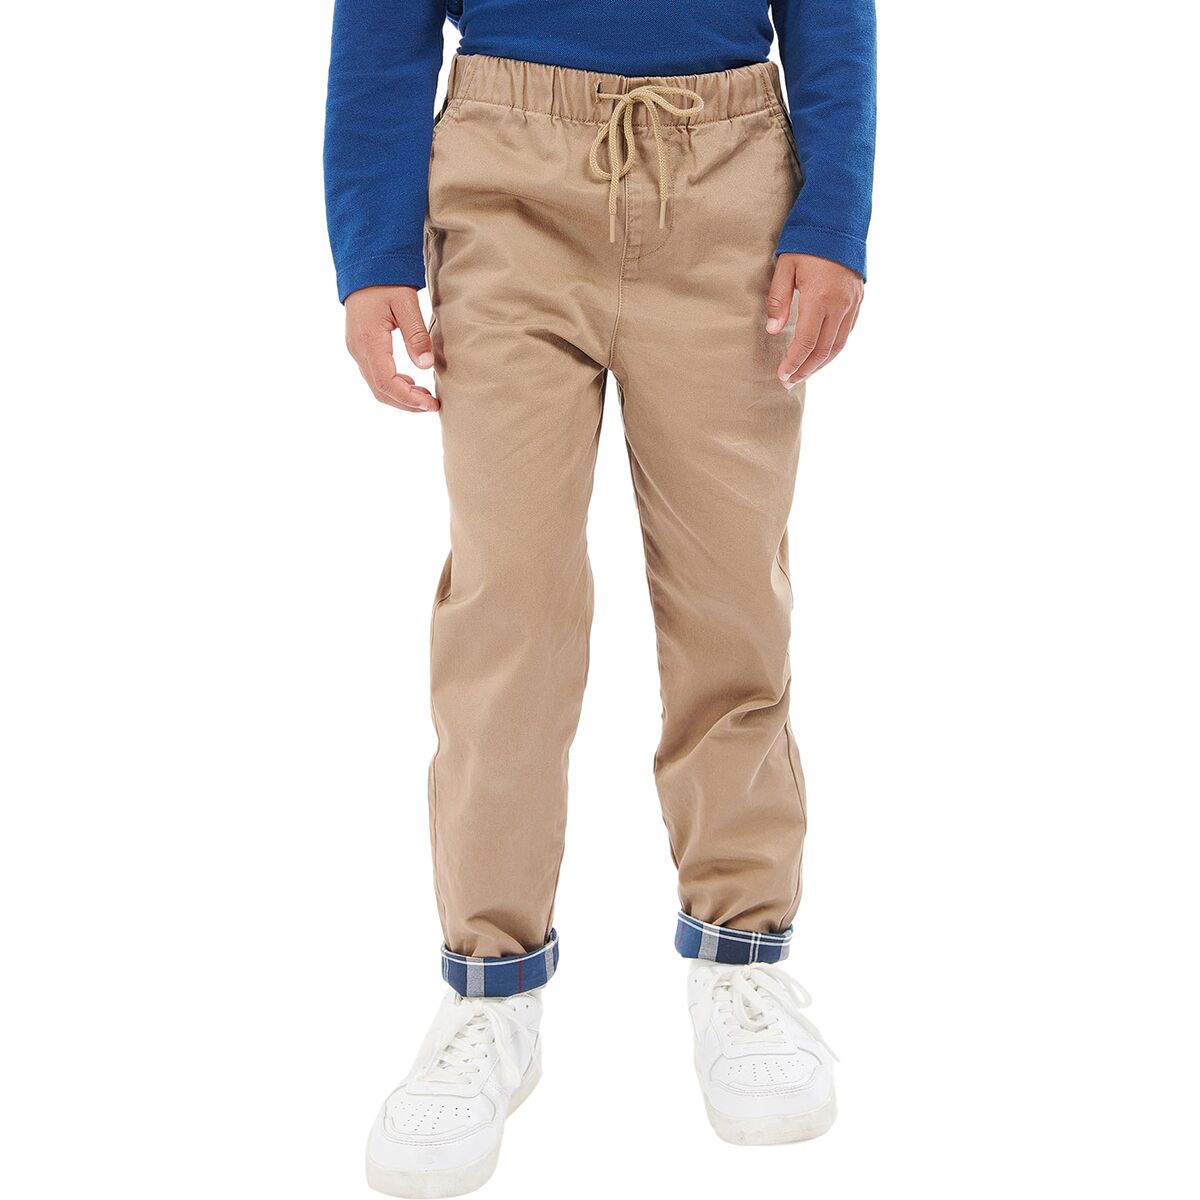 Barbour Essential Chino Pant - Boys'